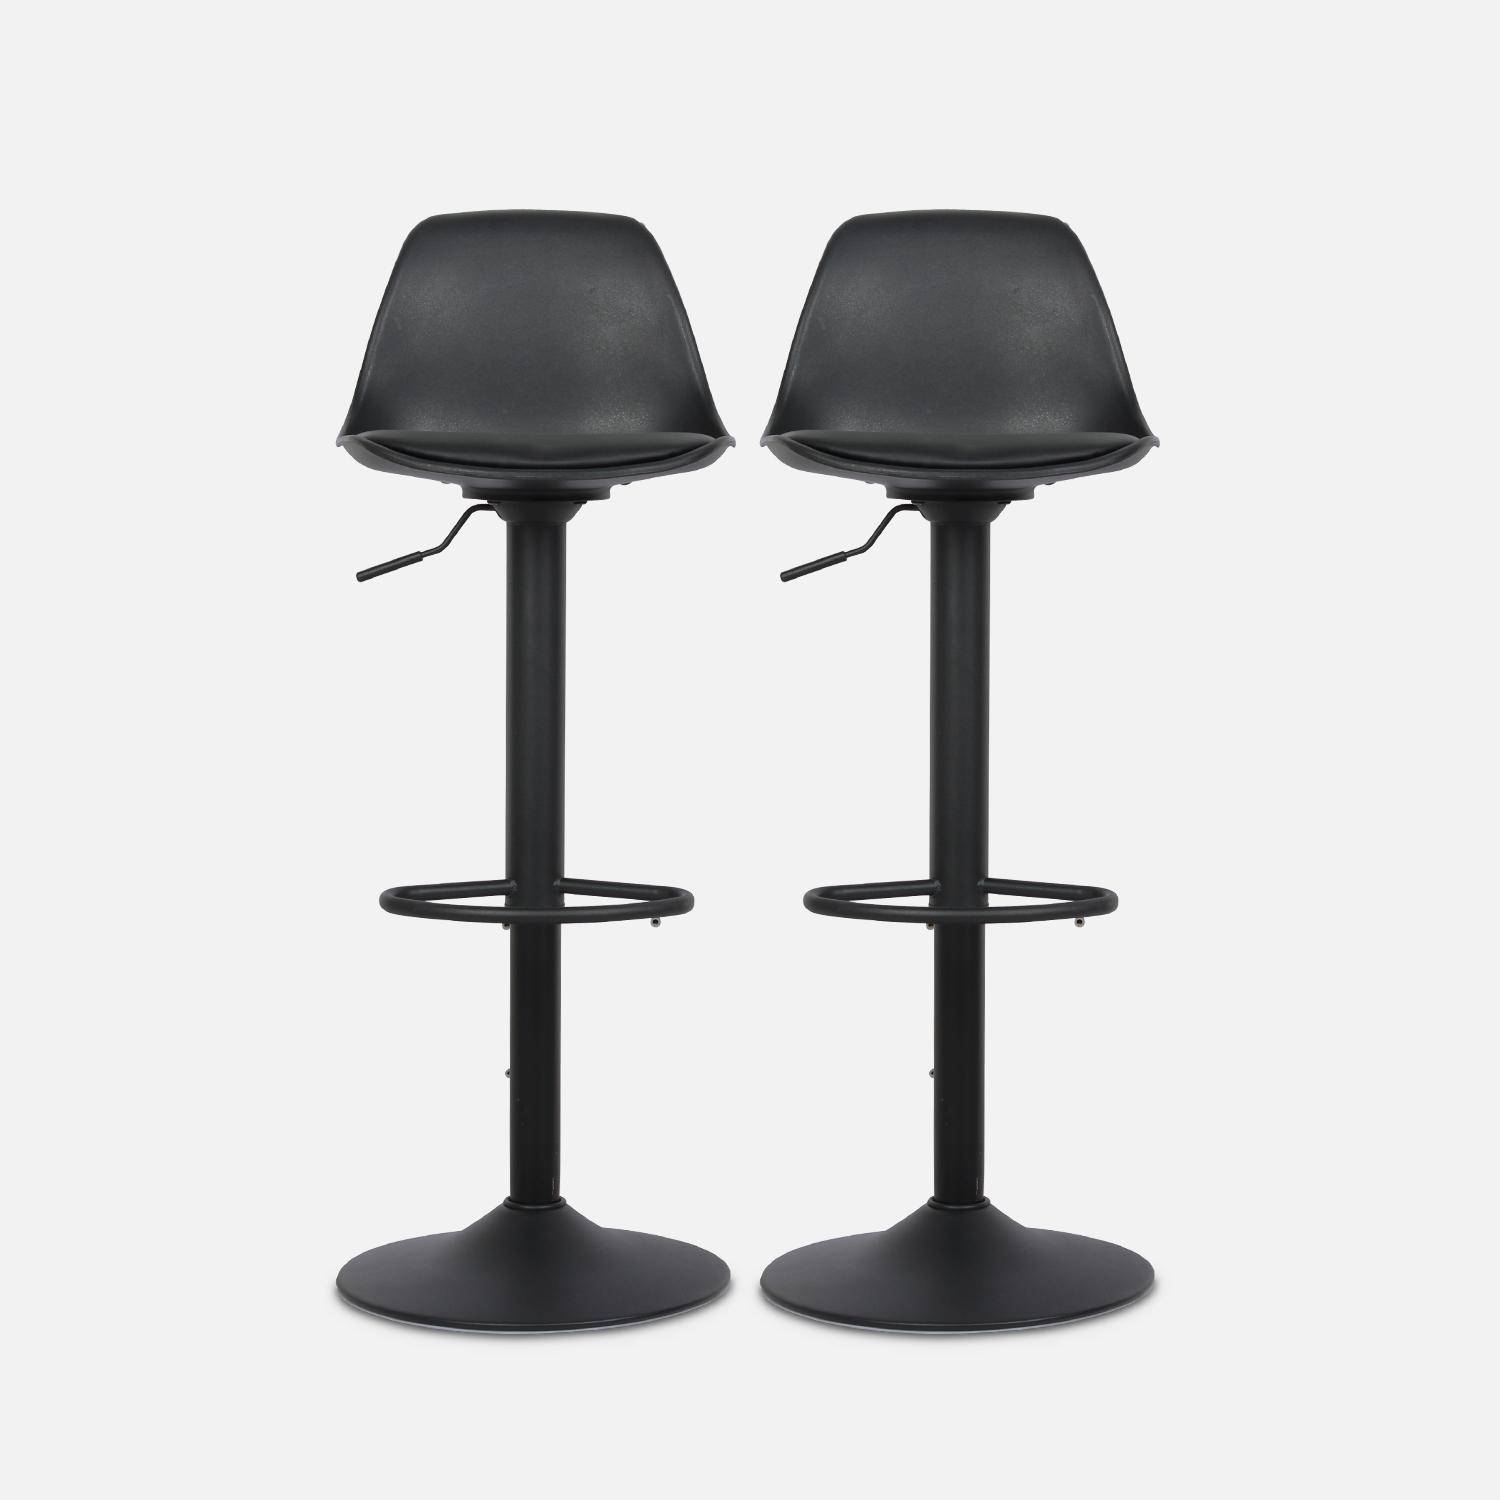 Pair of faux leather, rounded backrest, adjustable bar stools, seat height 61.5 - 83.5cm - Noah - Black Photo4